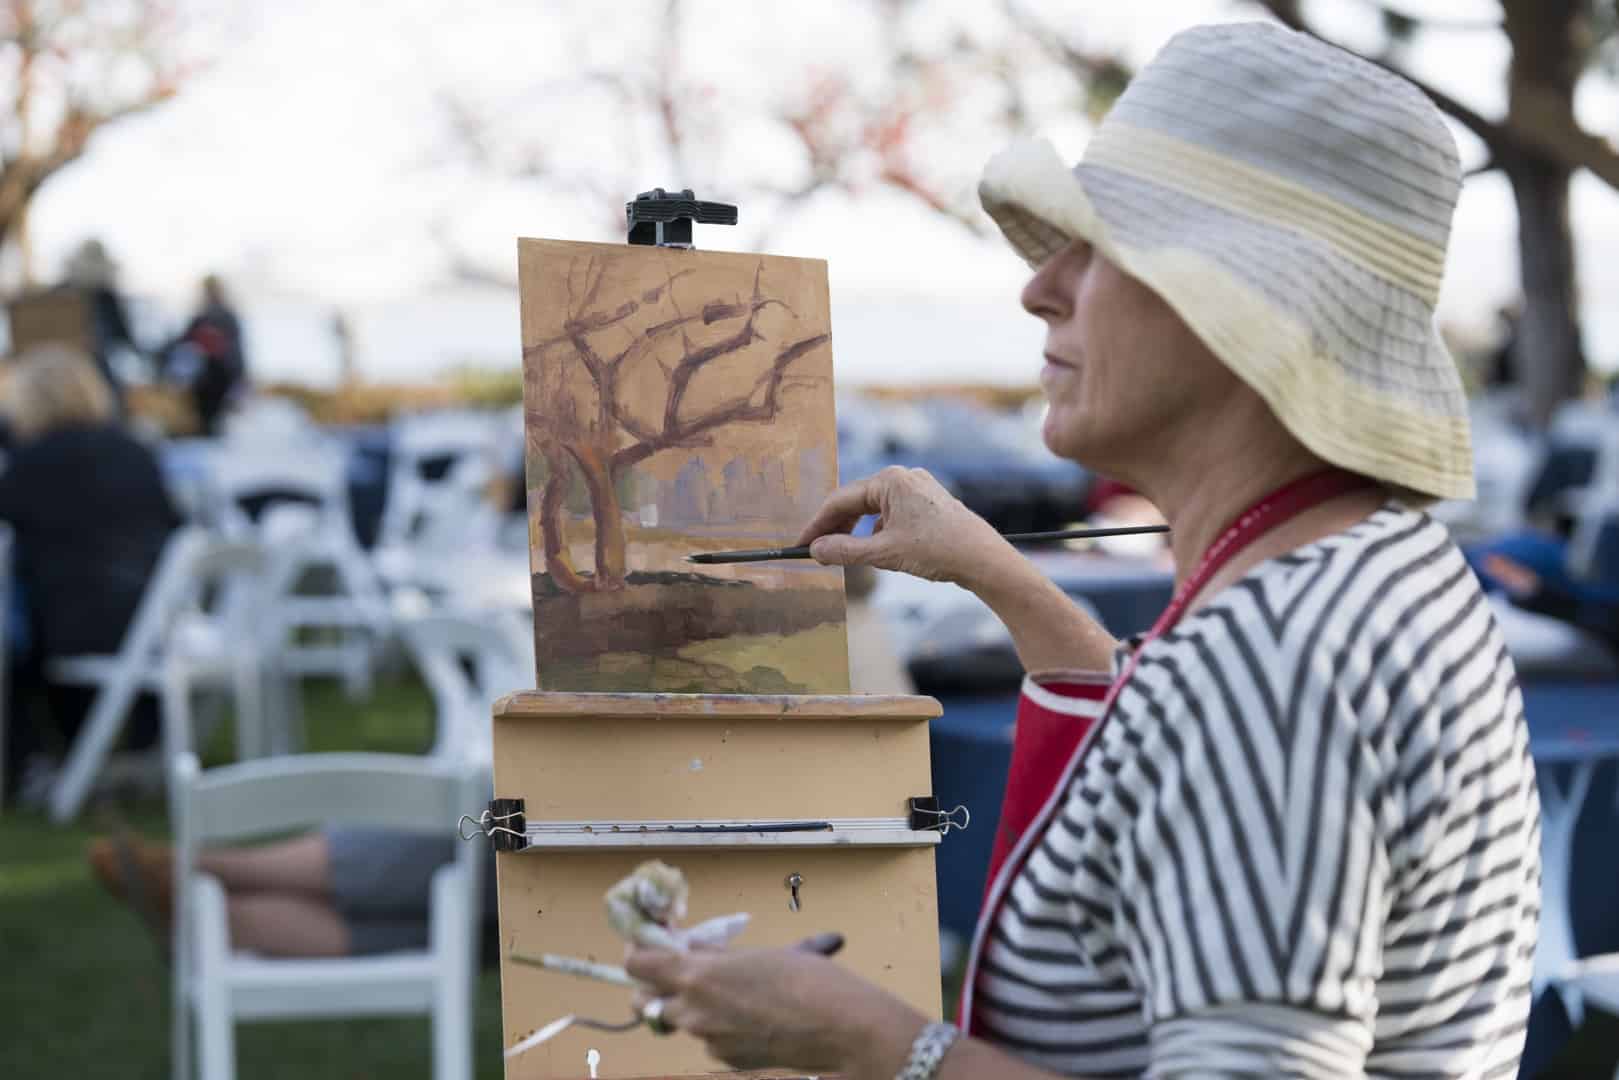 FREE: The Ultimate Plein Air 101 Guide for Artists - OutdoorPainter